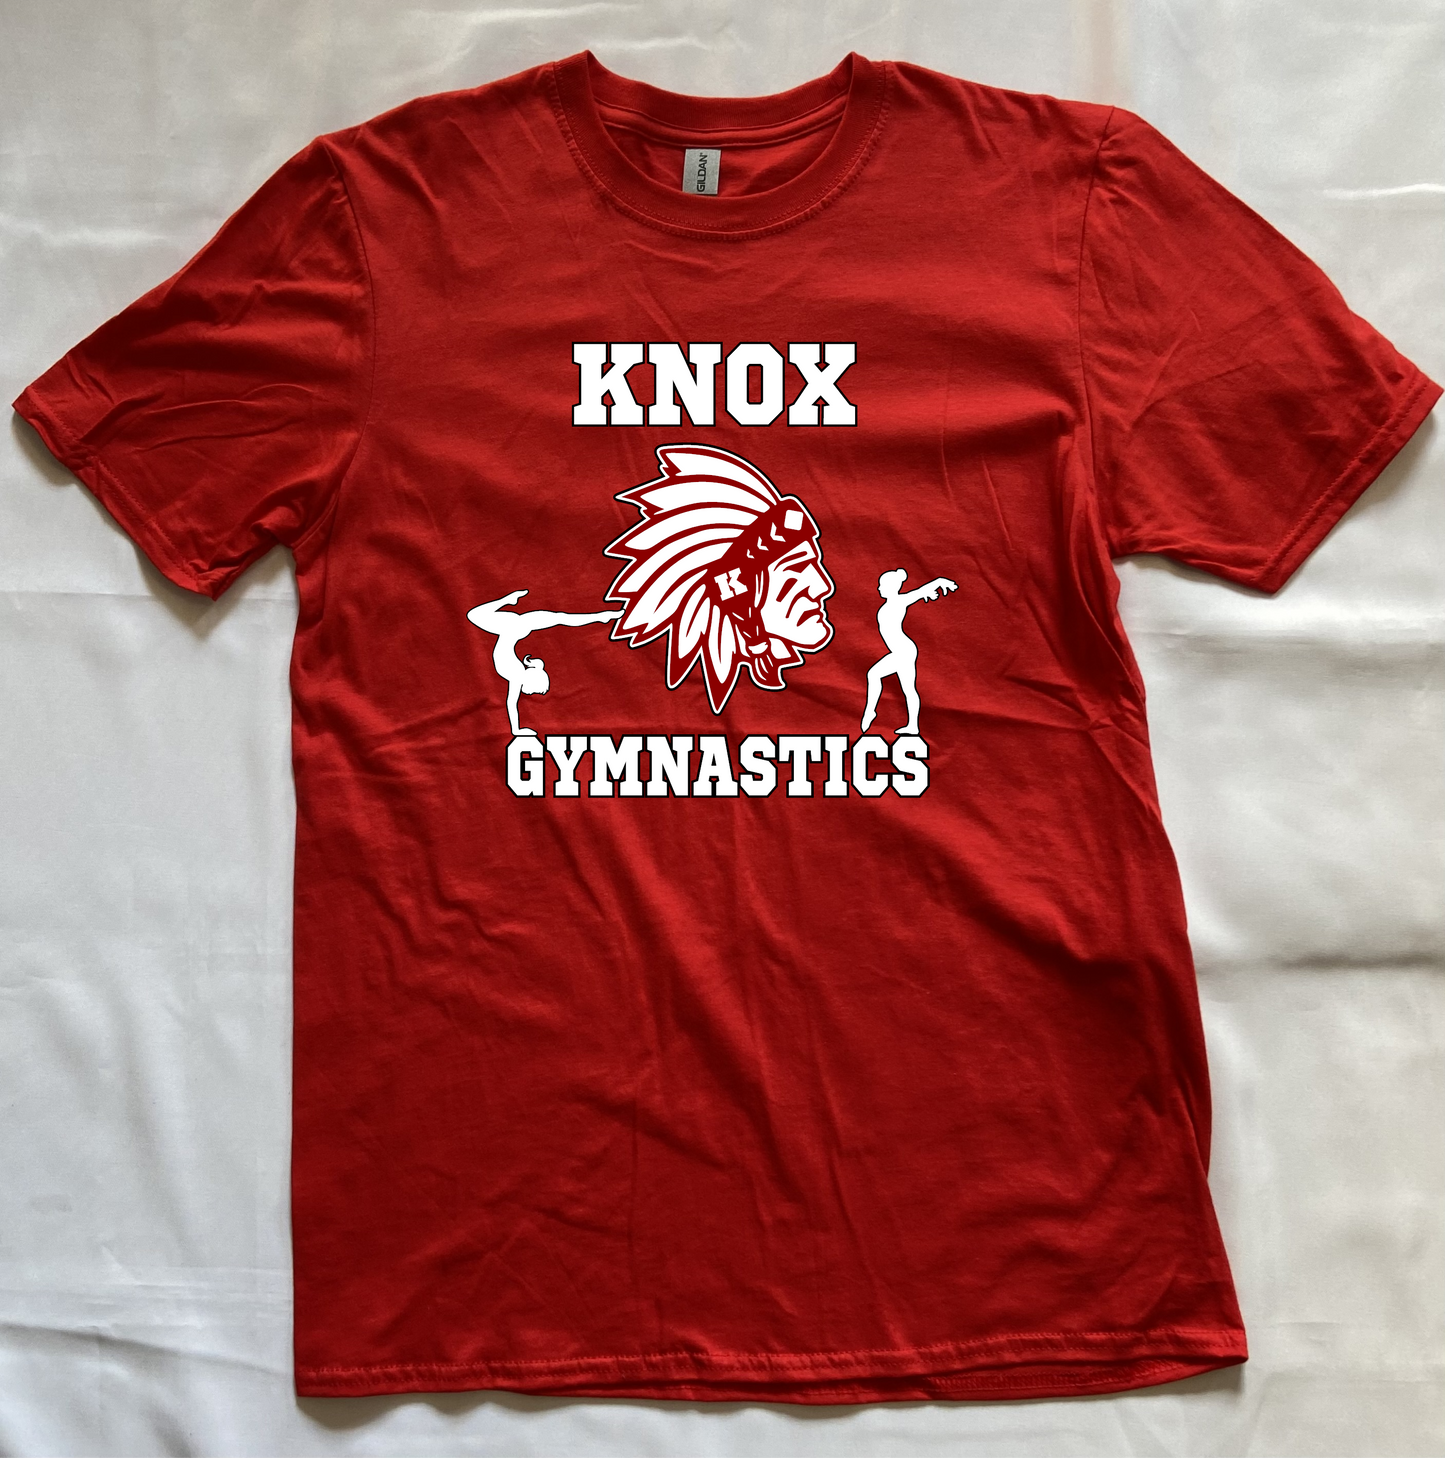 Knox Redskins Gymnastics T-shirt - Red - Adult and Youth Sizes